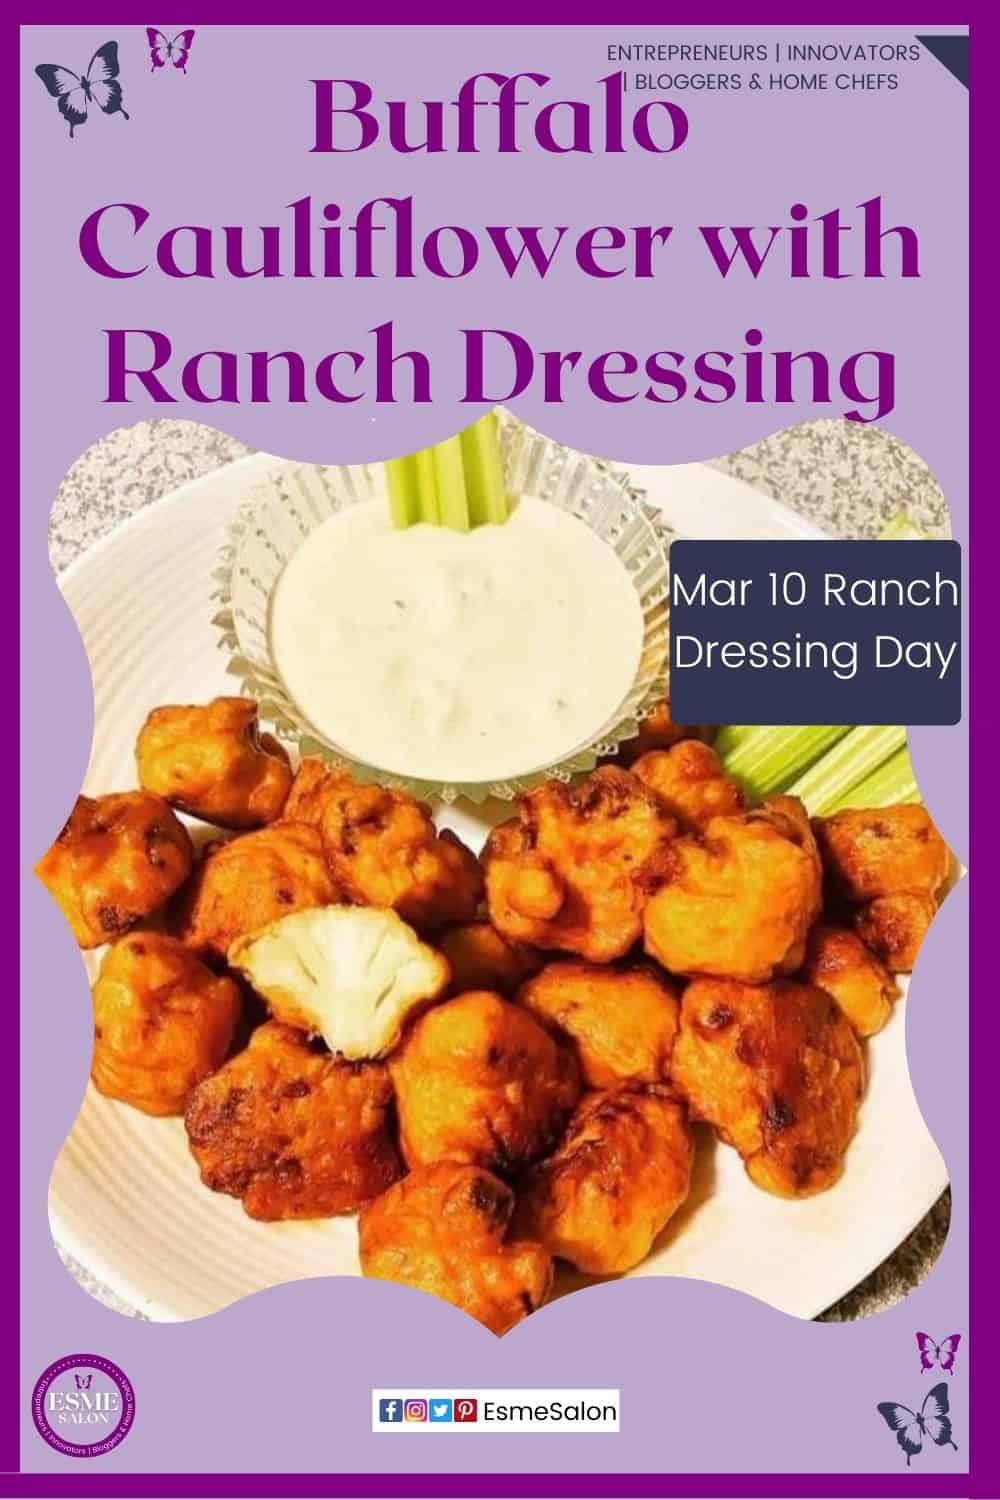 an image of Buffalo Cauliflower and a bowl of Ranch Dressing with celery sticks on the side